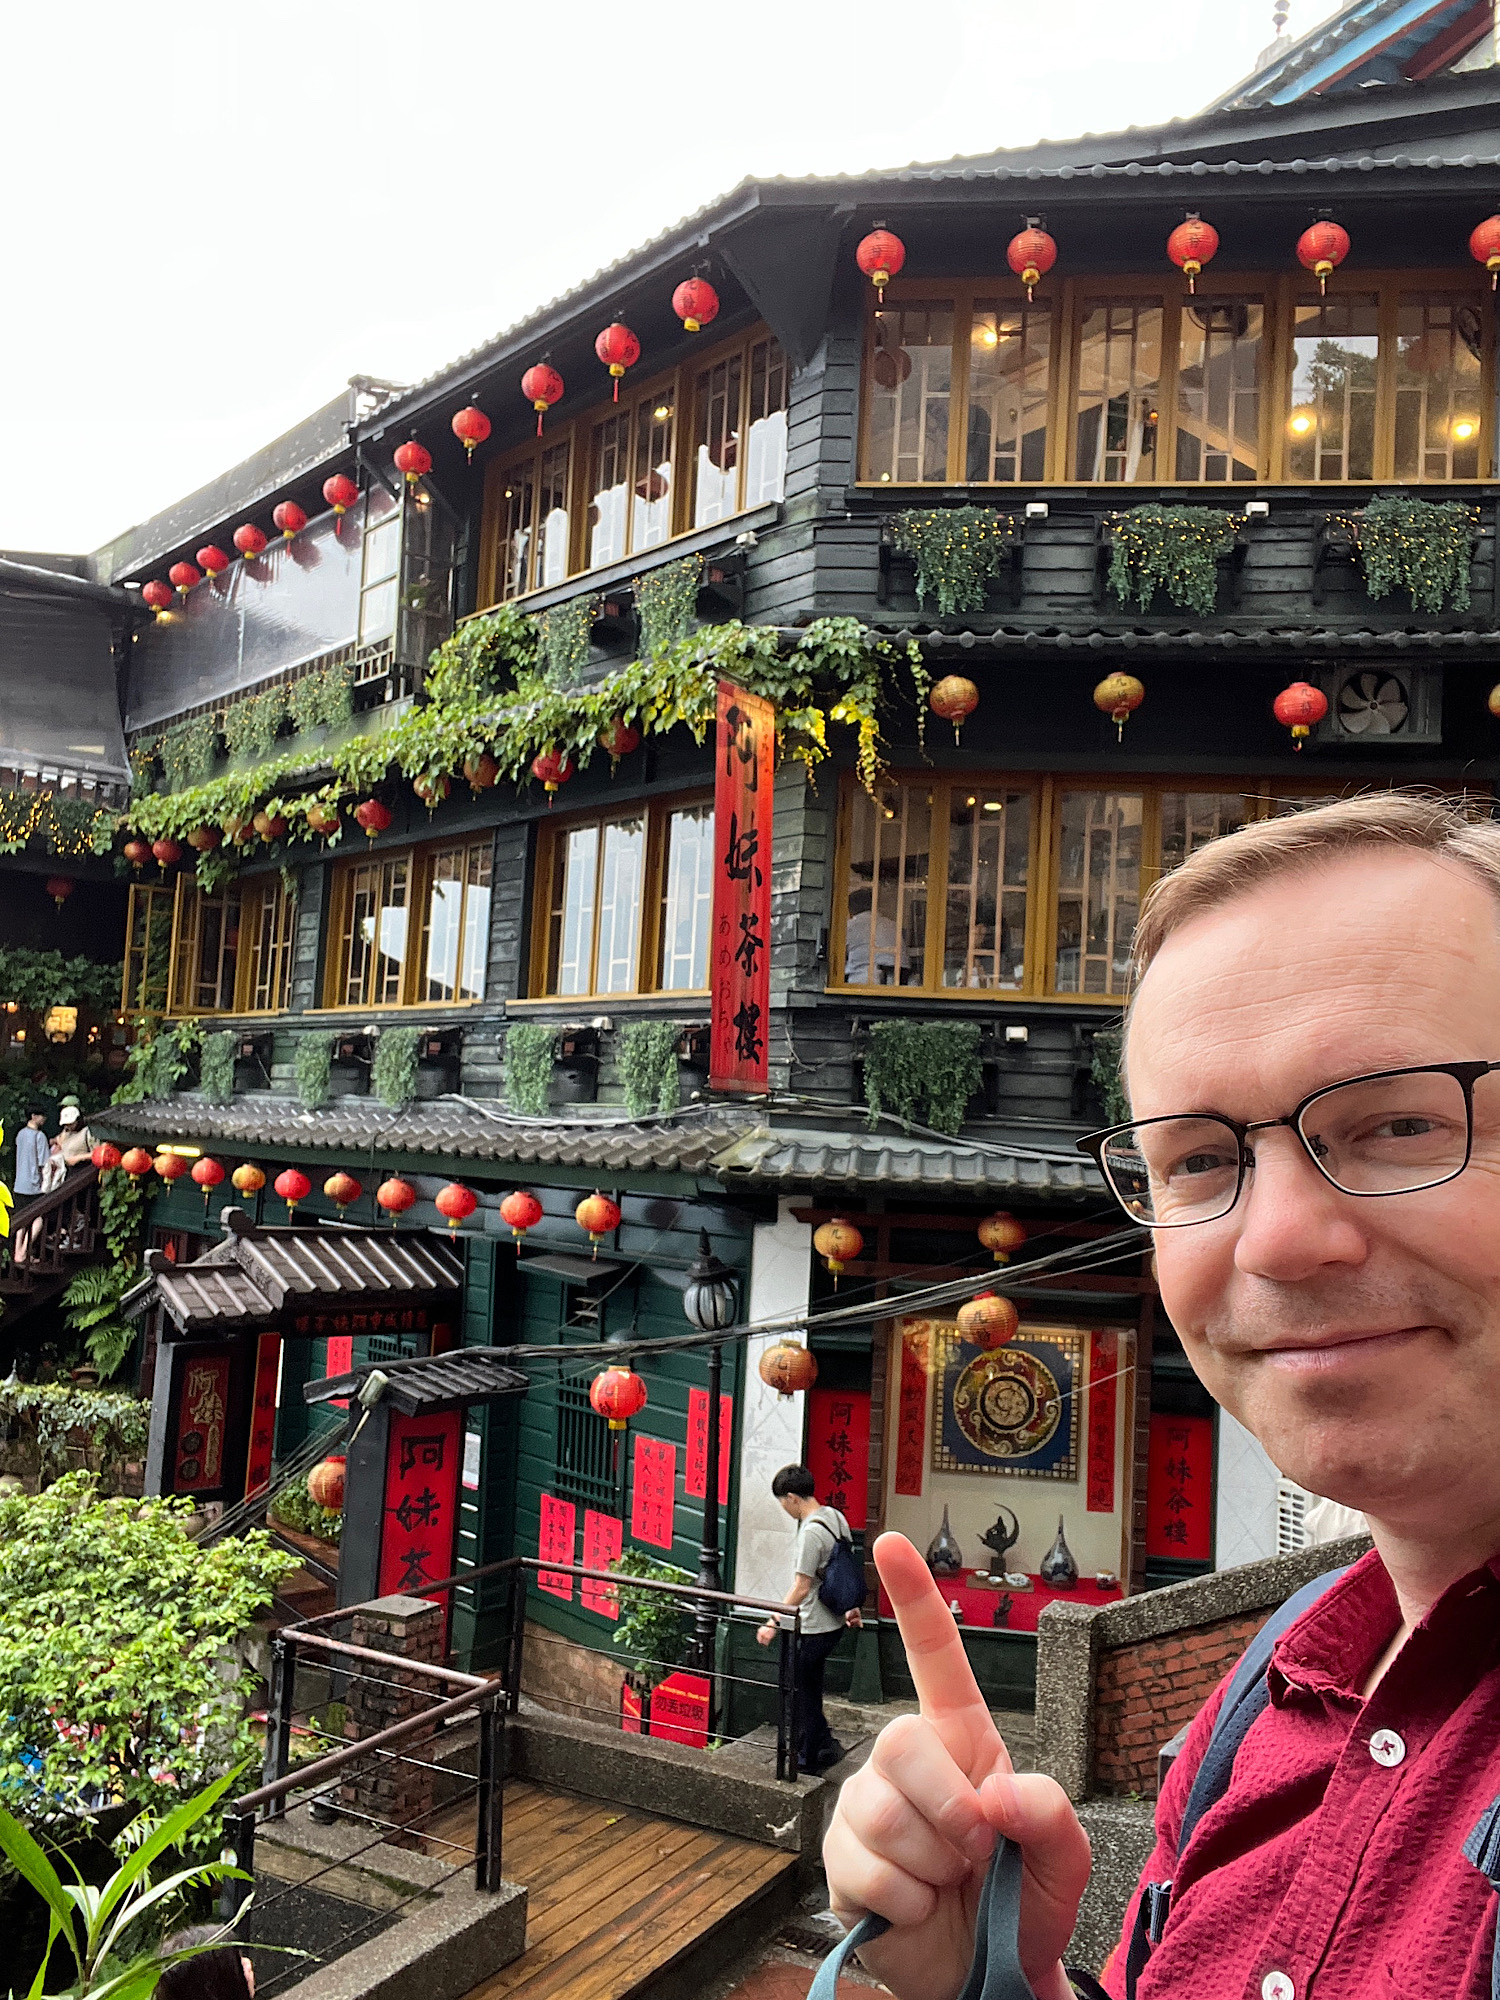 Chad in front of the A-Mei tea house, one of the inspirations for the design of the bath house in the Ghibli film “Spirited Away”